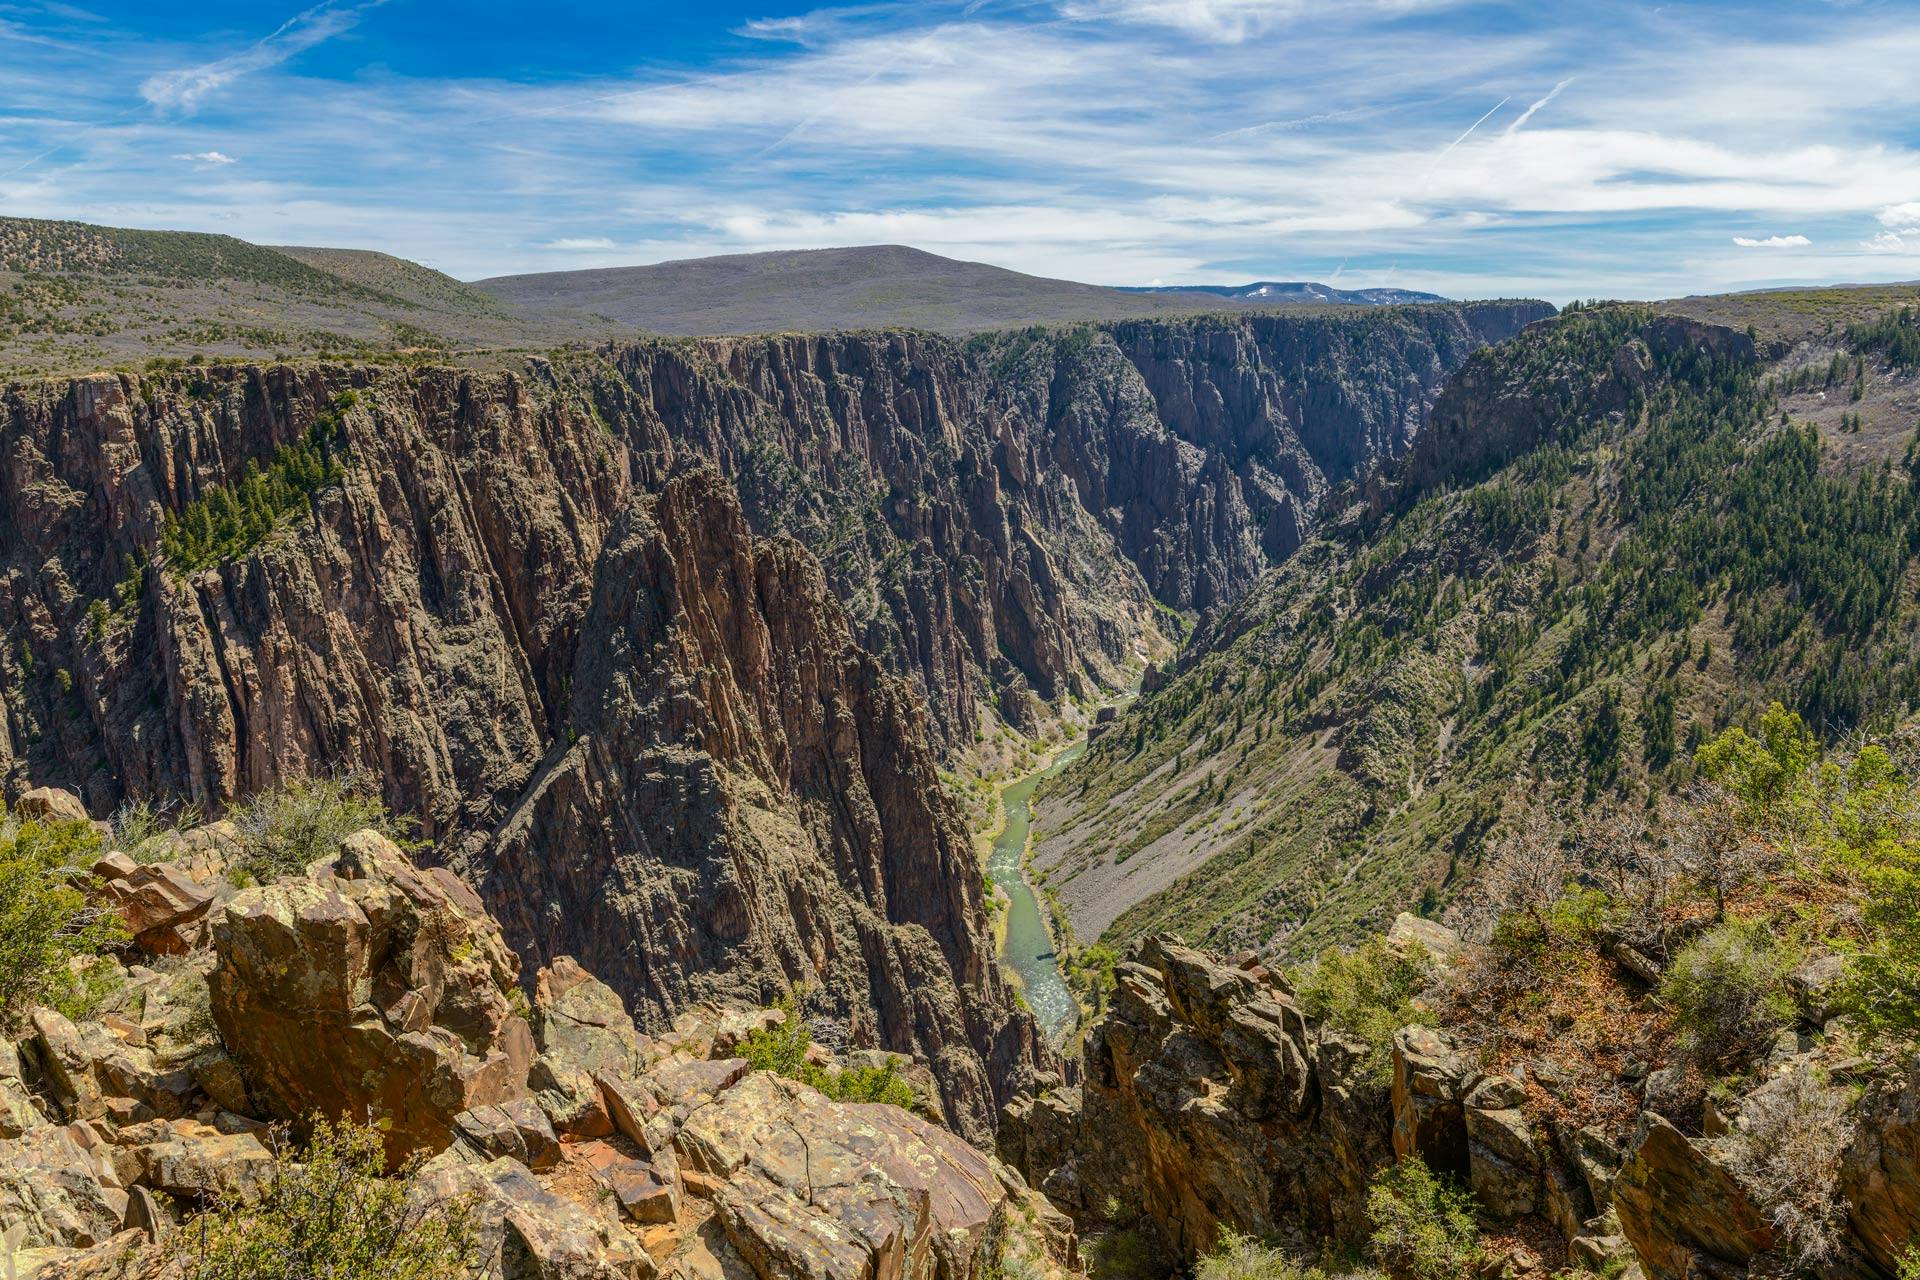 The Best Camping Near Black Canyon of the Gunnison National Park, Colorado